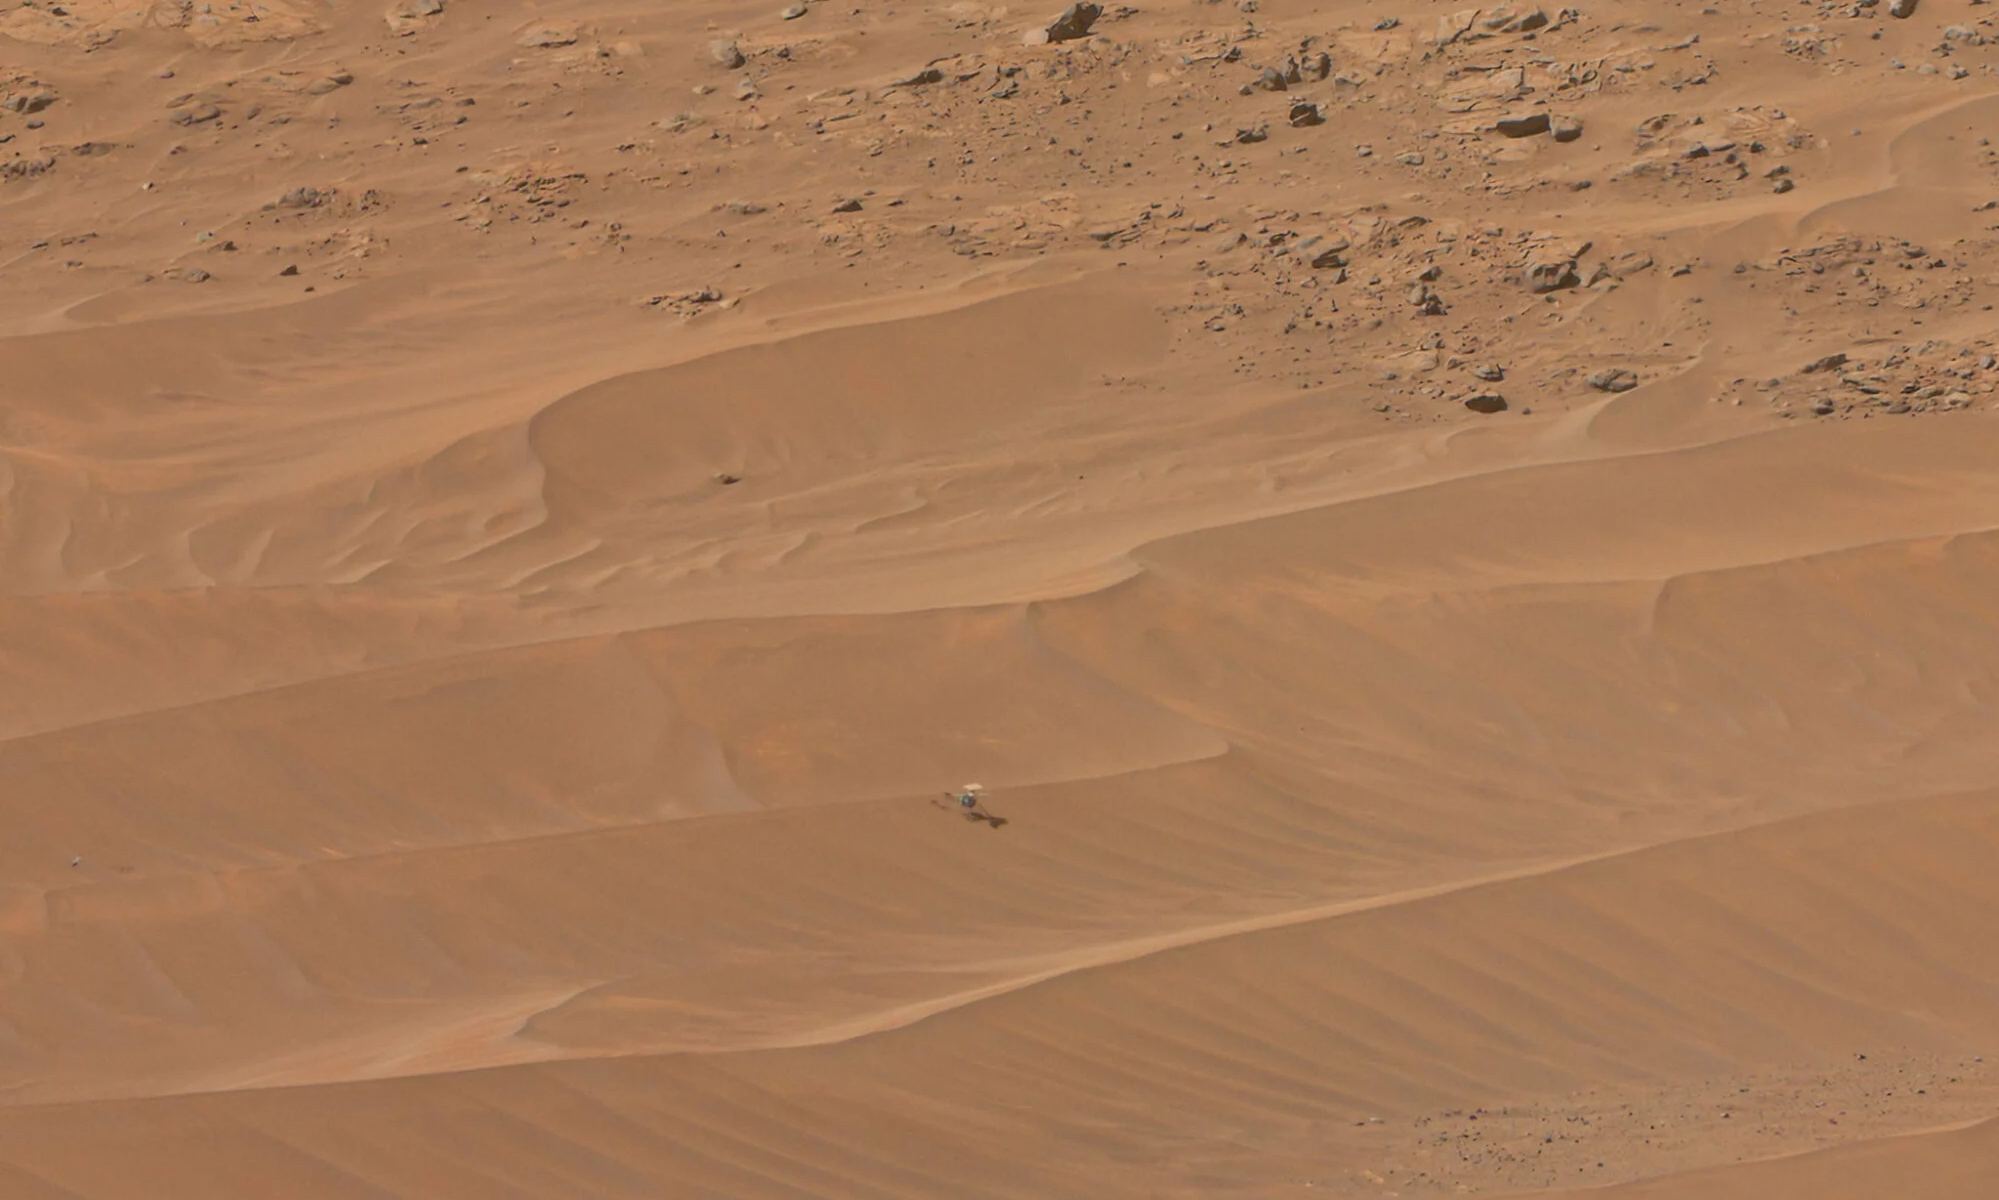 Image of the final resting place of the Ingenuity helicopter on Mars.